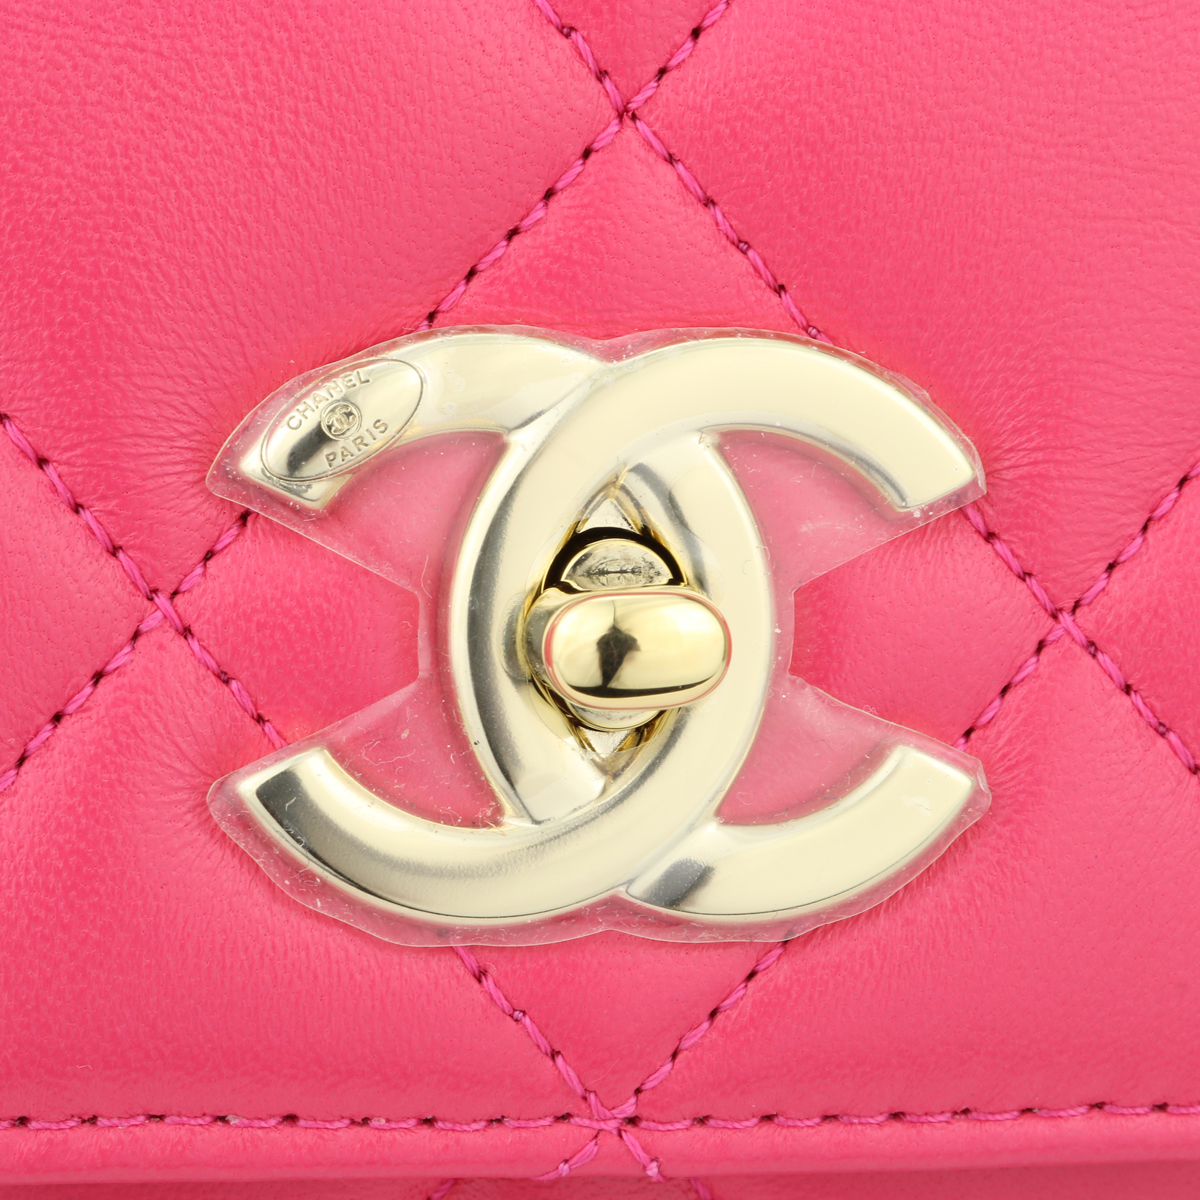 Chanel Light Pink Quilted Lambskin Trendy CC Wallet On Chain Gold